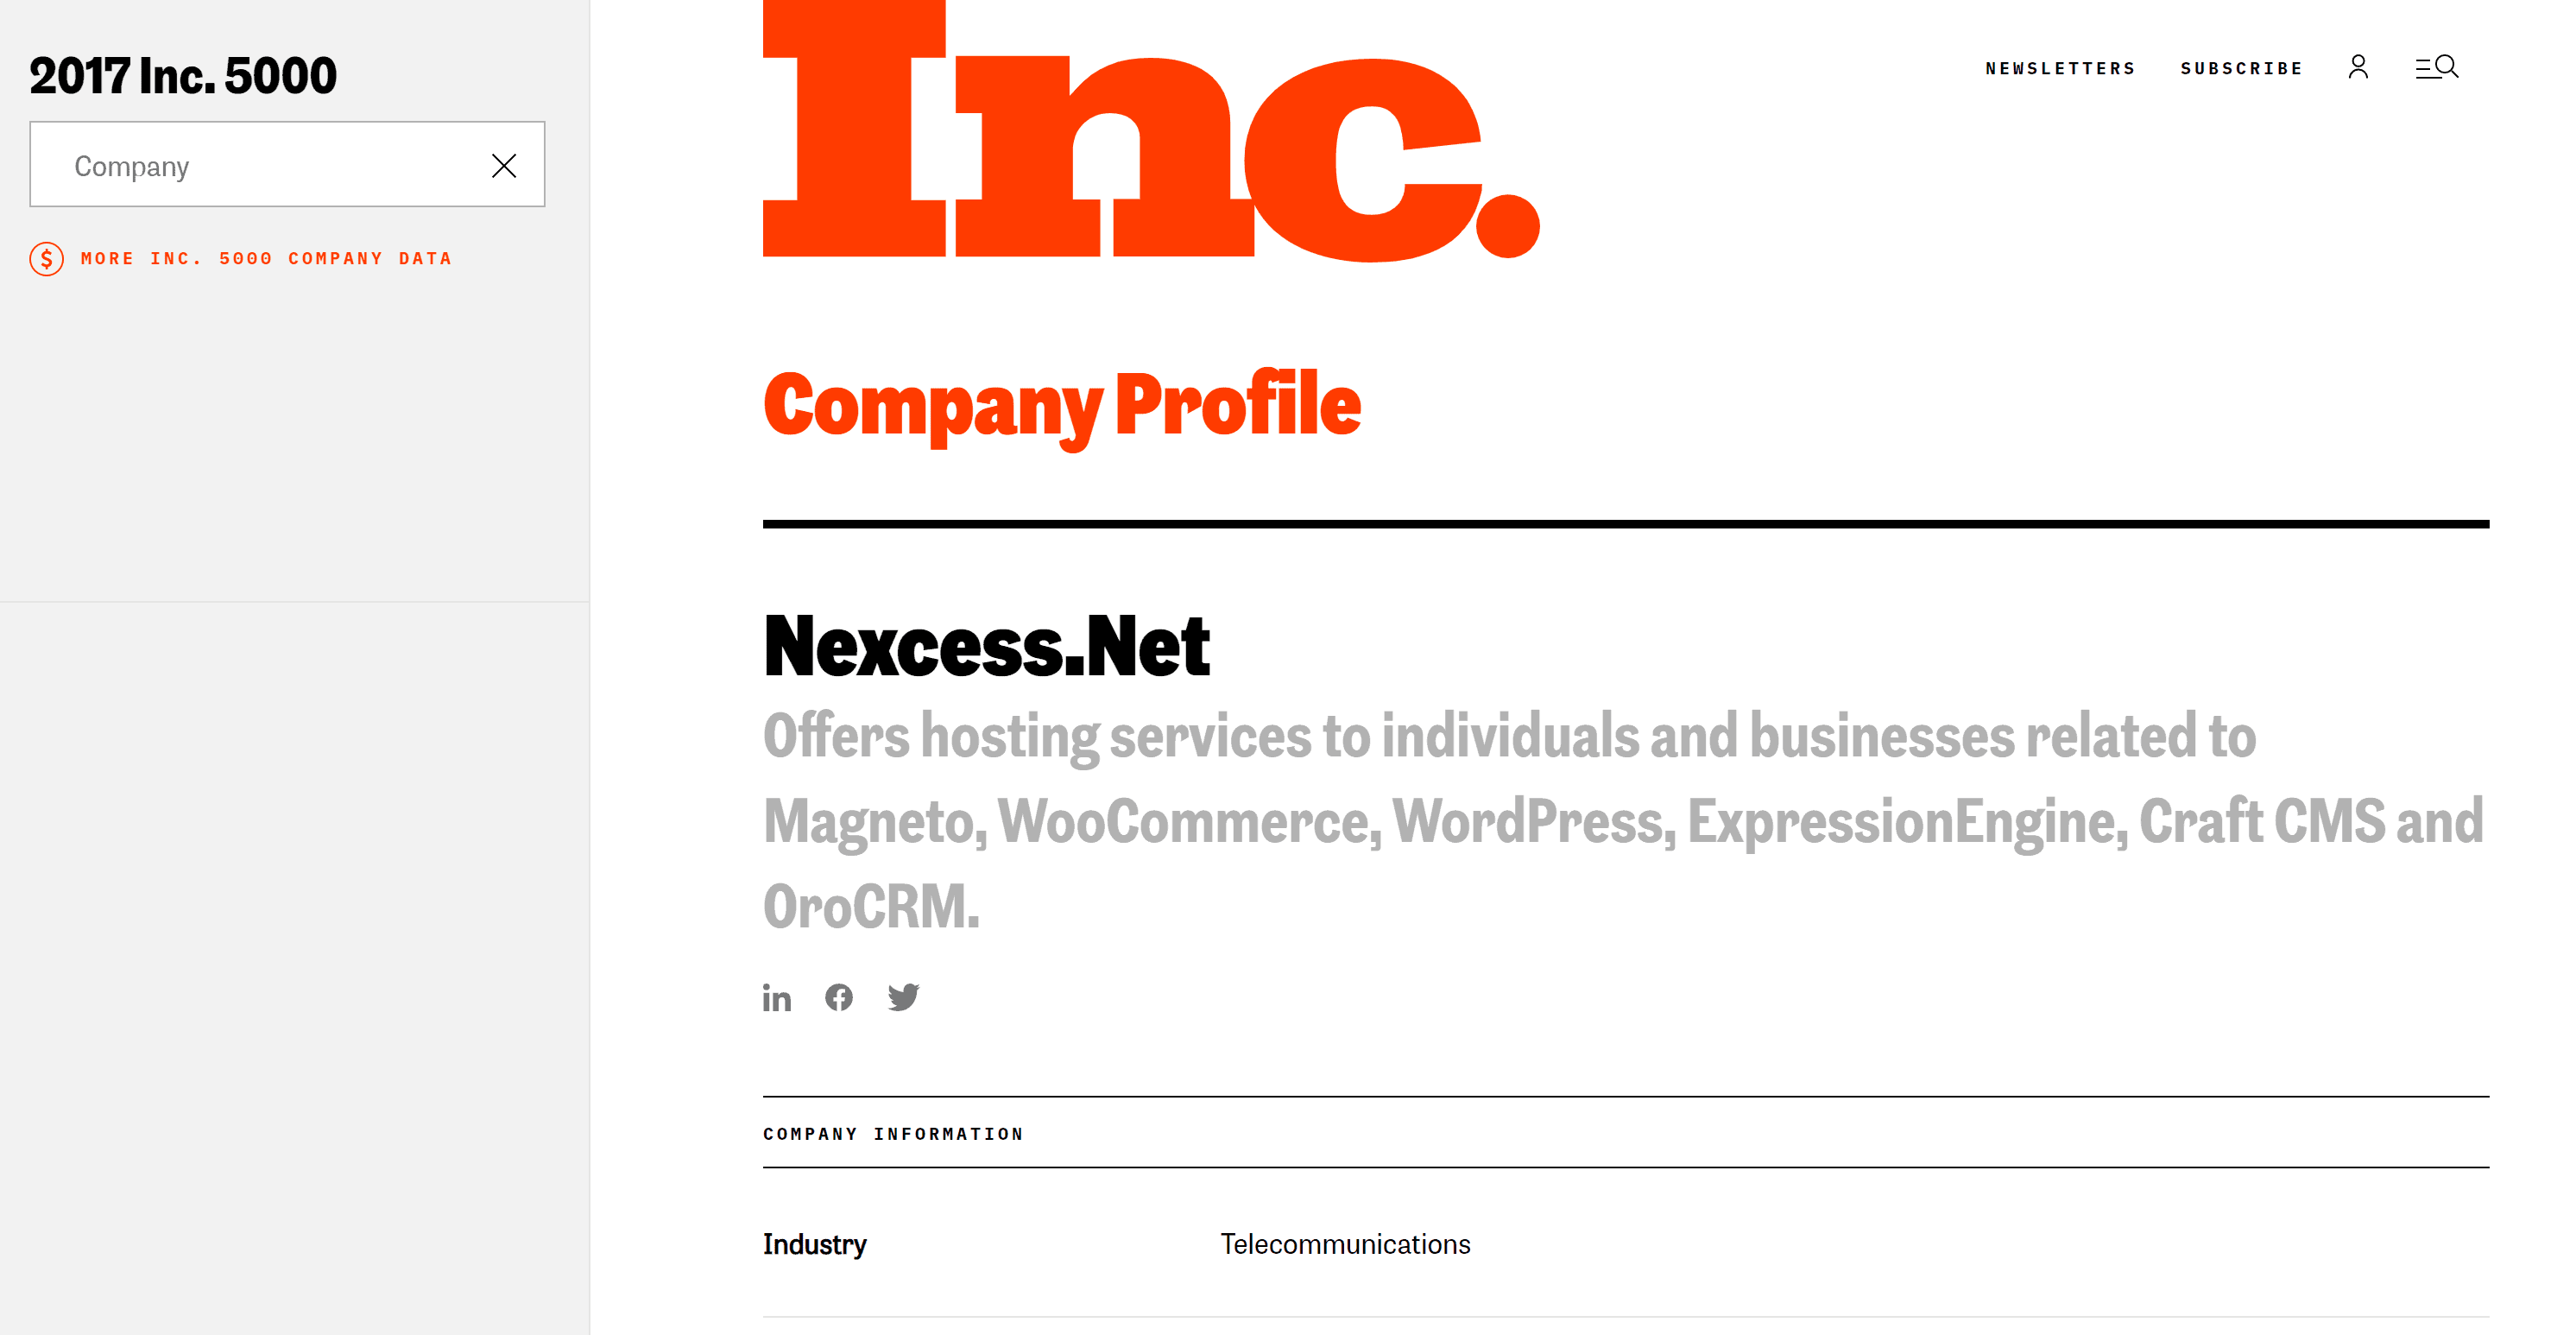 Nexcess has made the Inc 5000 list 8 times since 2010